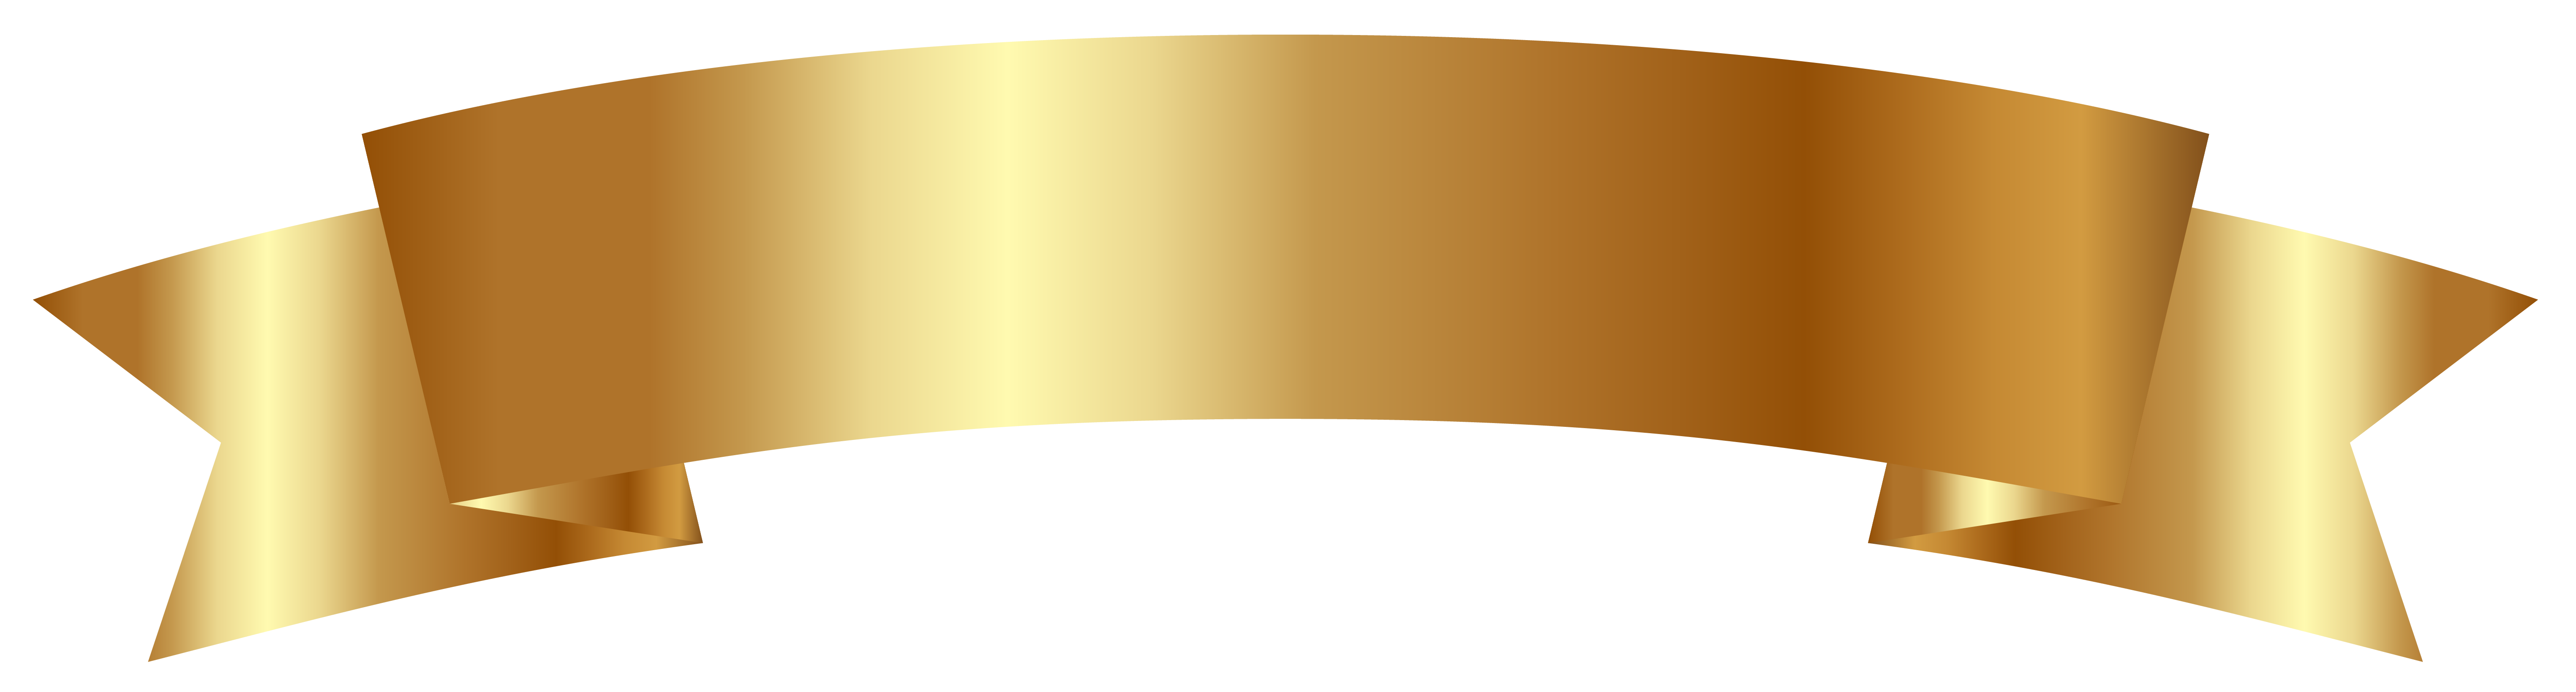 Banner Gold Clipart PNG Image 